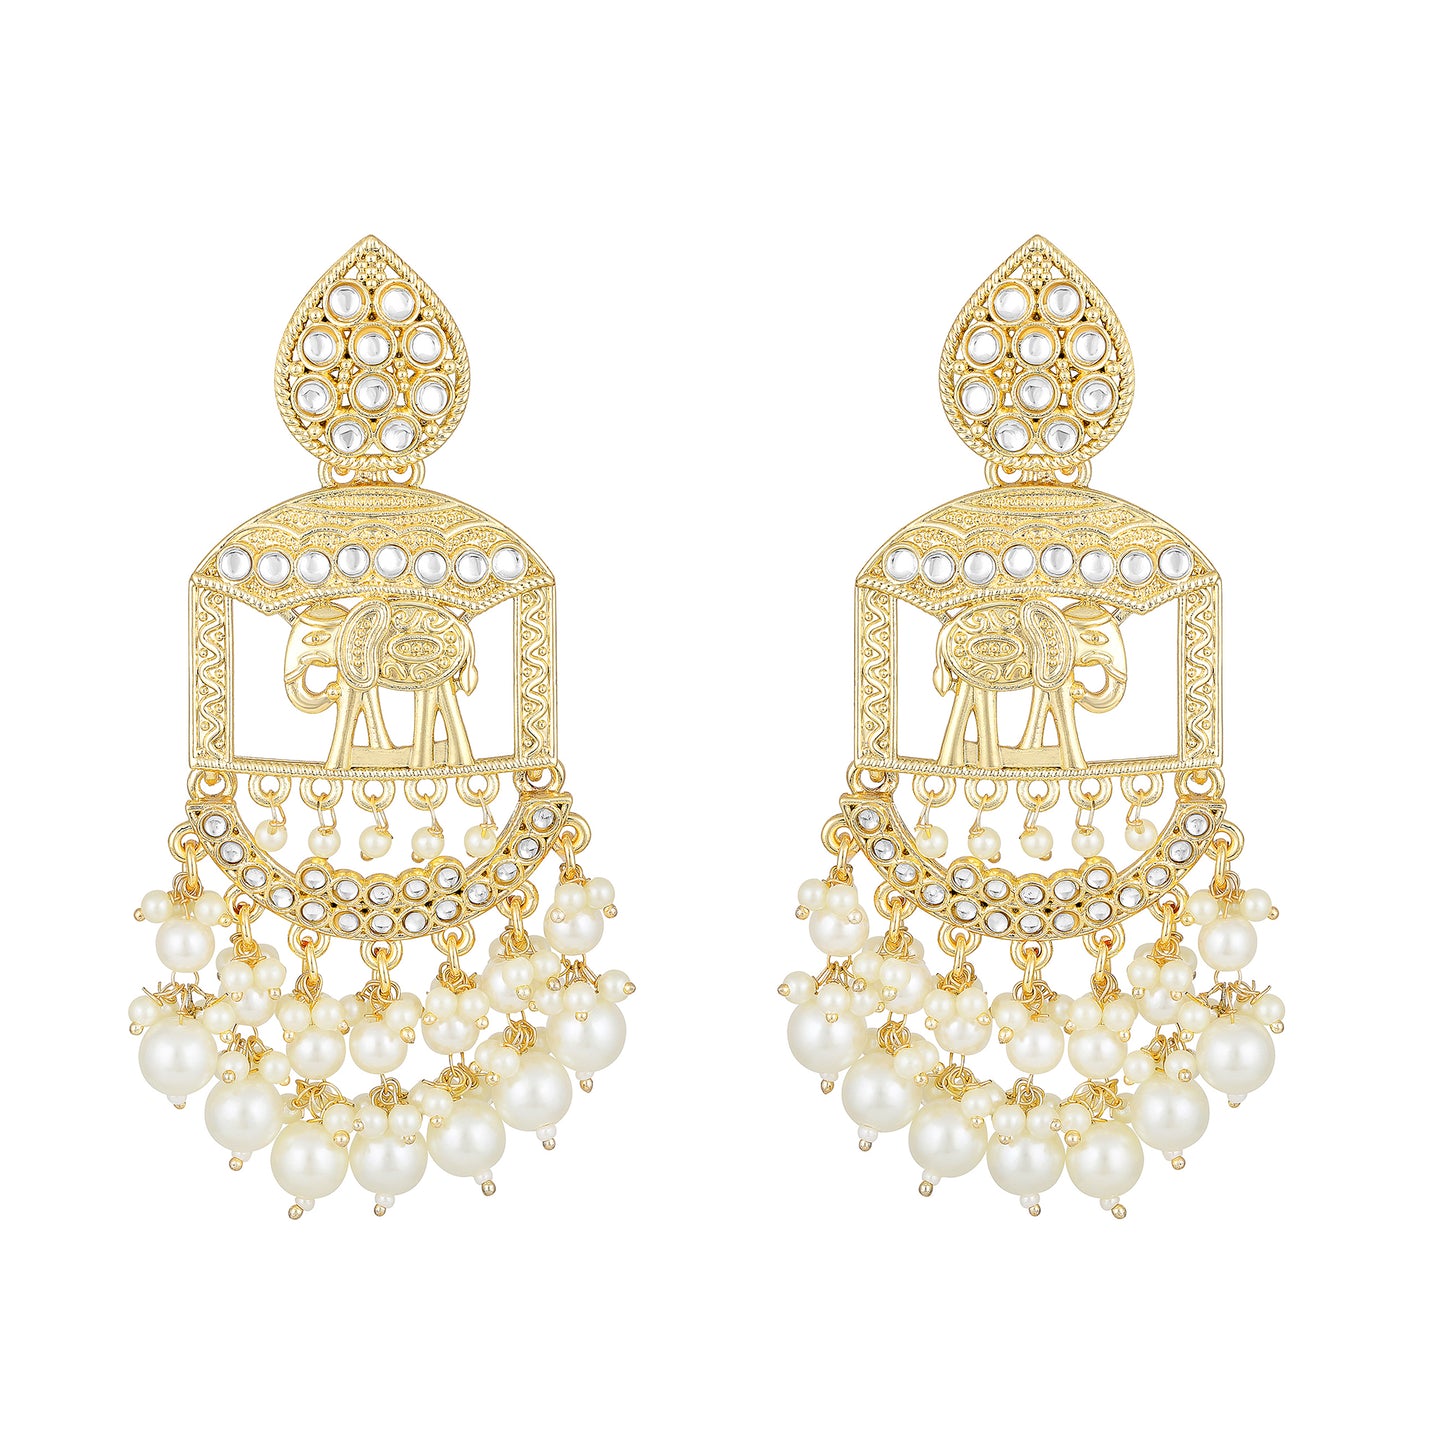 Bdiva 18K Gold Plated Traditional Elephant Earrings with Semi Cultured Pearls.